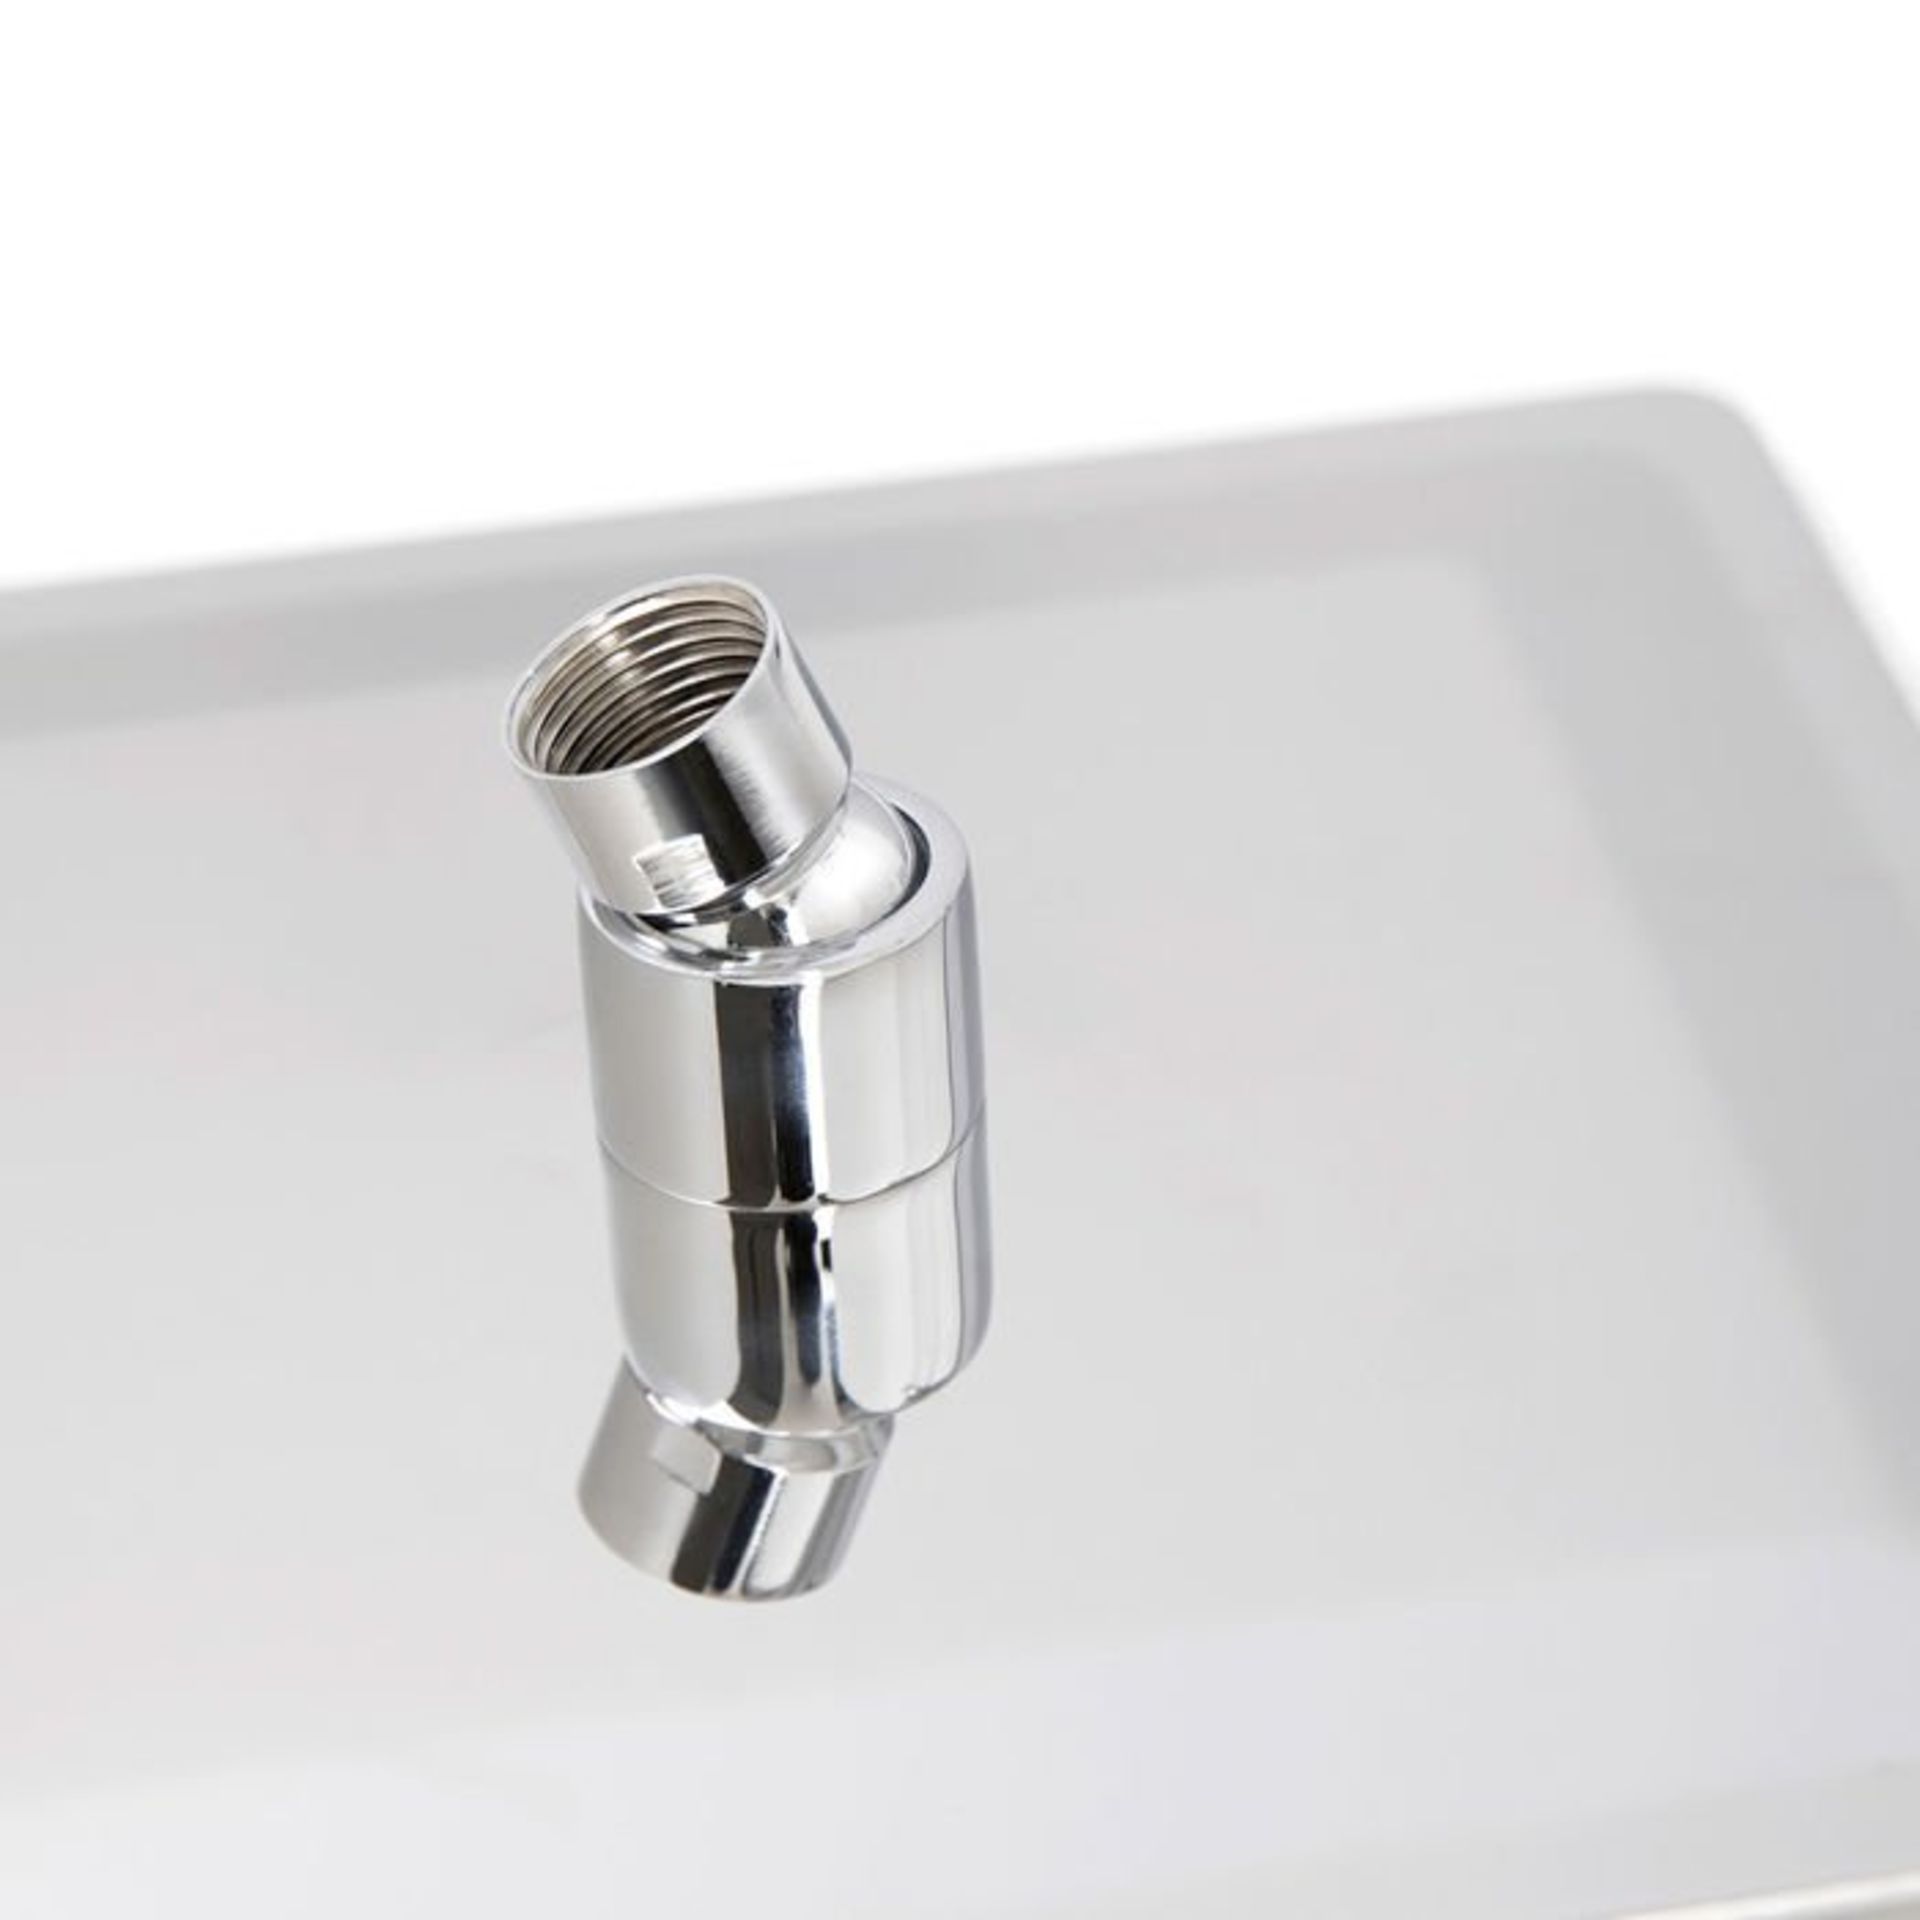 (G55) Square Concealed Thermostatic Mixer Shower Kit & Medium Head. RRP £349.99. Family friendly - Image 6 of 6